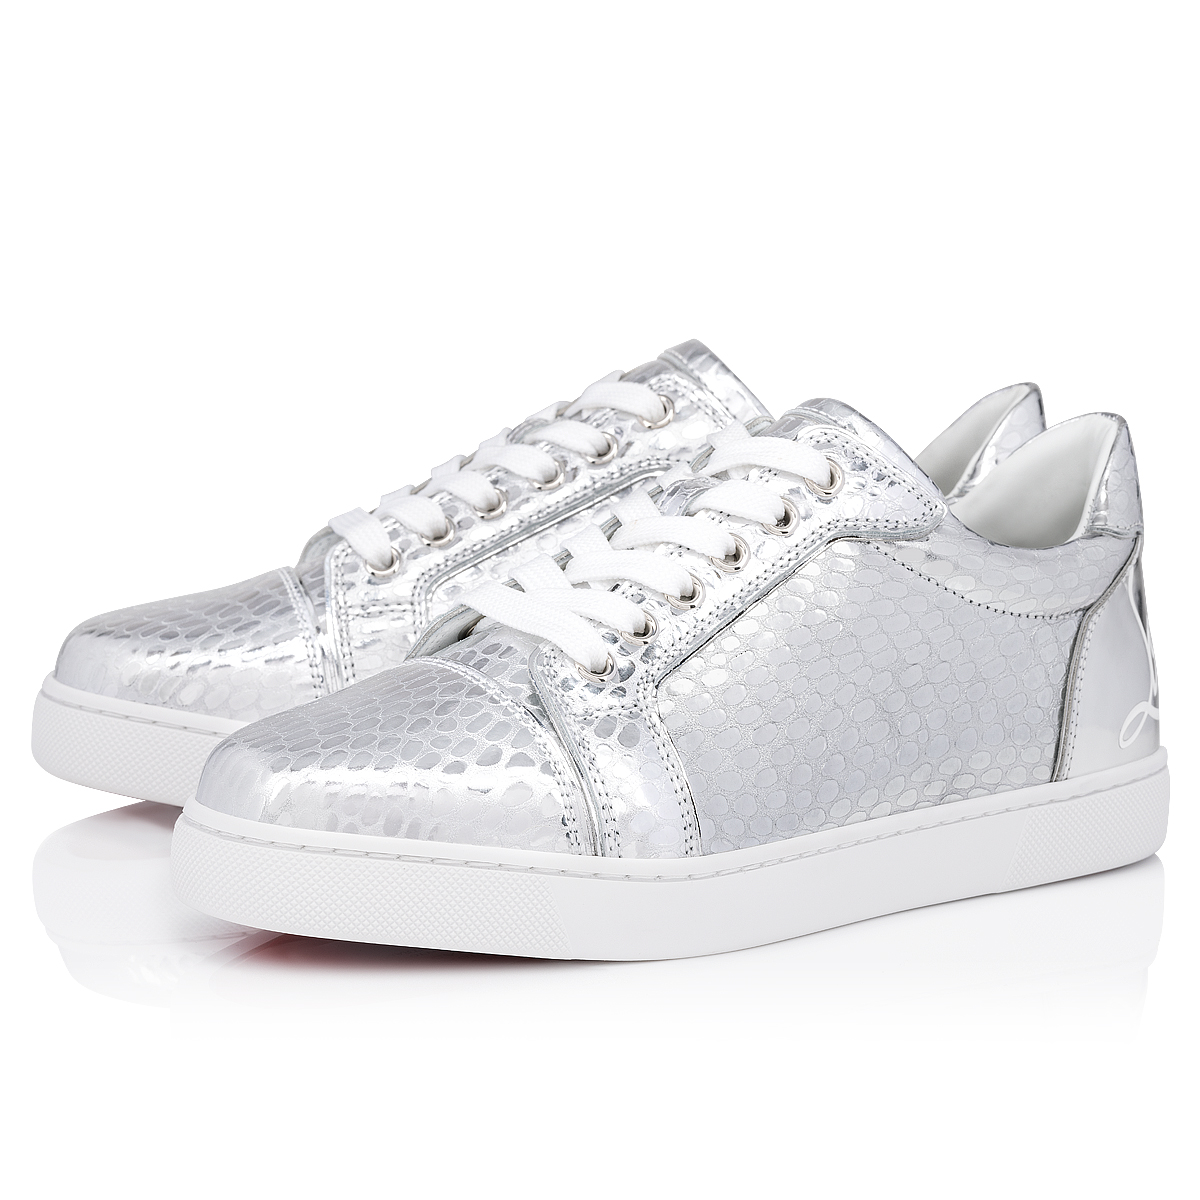 Fun Vieira - Sneakers - Iridescent calf leather and spikes - Silver - Women - Christian Louboutin United States